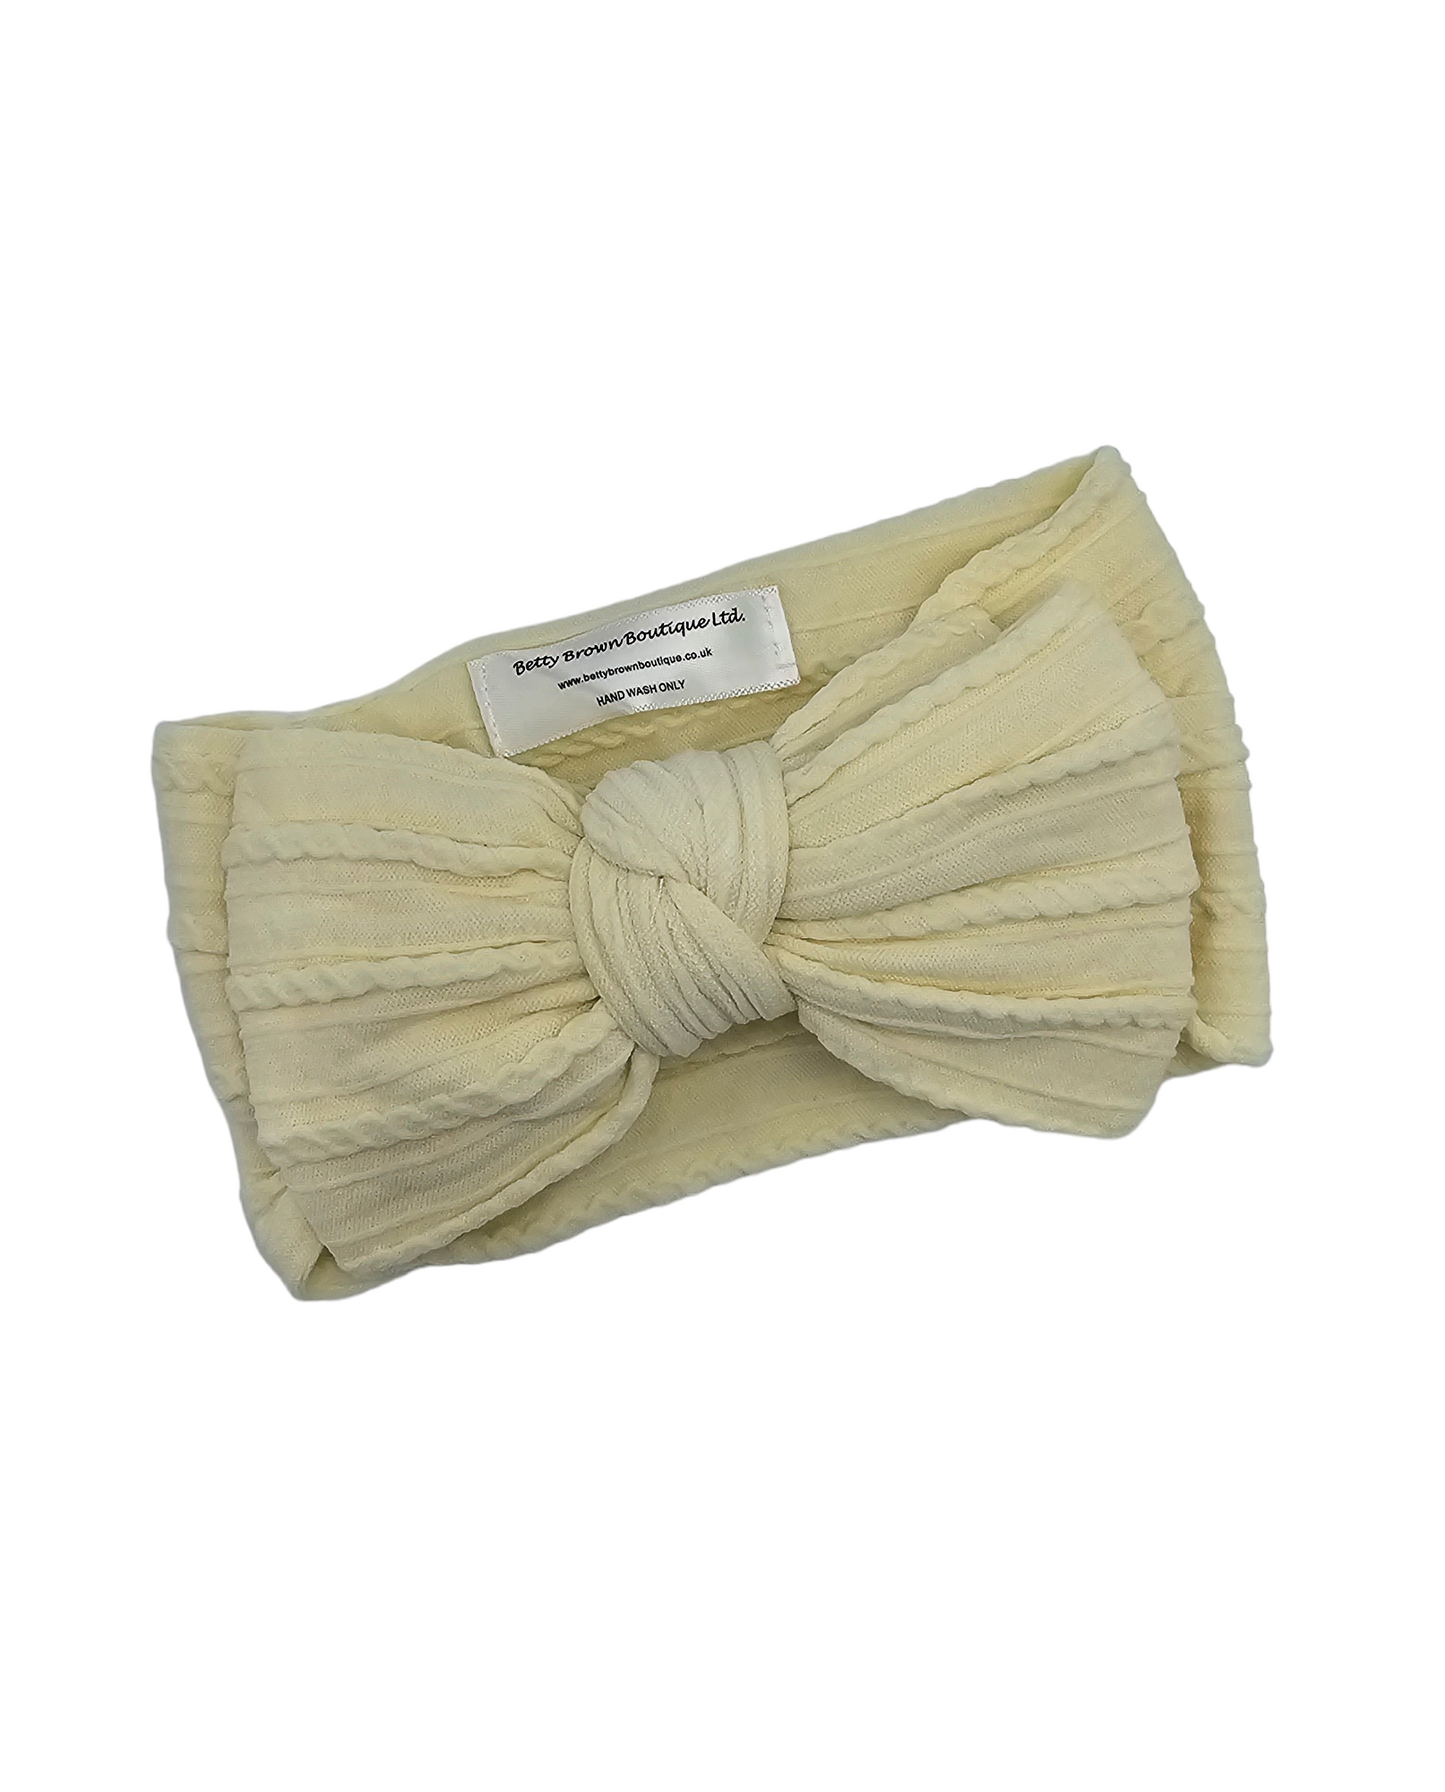 Custard Larger Bow Cable Knit Headwrap - Betty Brown Boutique Ltd